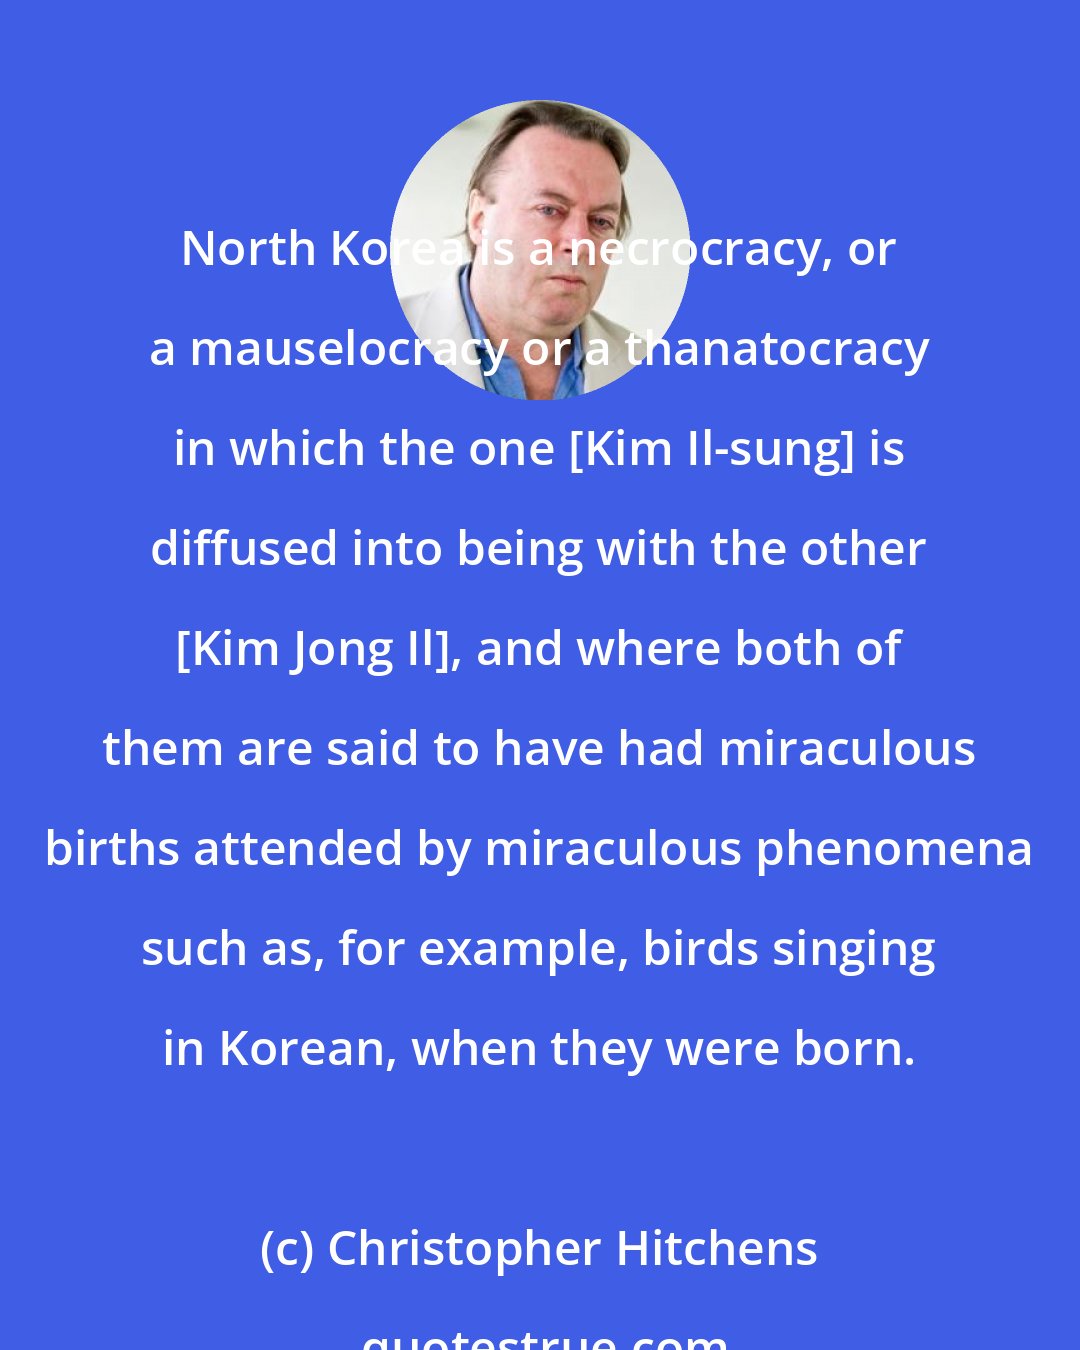 Christopher Hitchens: North Korea is a necrocracy, or a mauselocracy or a thanatocracy in which the one [Kim Il-sung] is diffused into being with the other [Kim Jong Il], and where both of them are said to have had miraculous births attended by miraculous phenomena such as, for example, birds singing in Korean, when they were born.